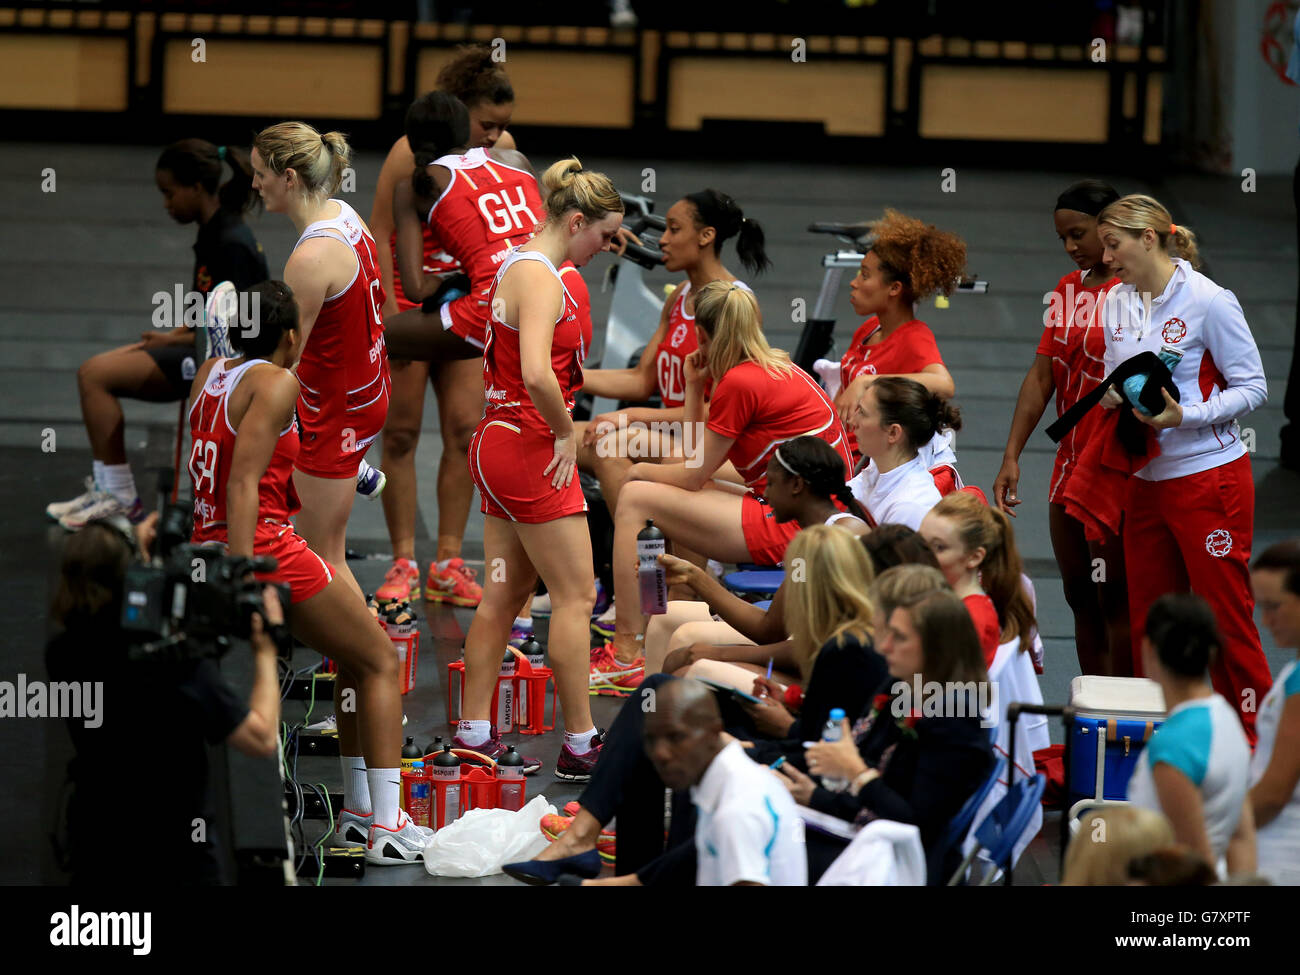 Netball - International Series - England v Trinidad and Tobago - Copper Box Arena. General view of England players on the sidelines Stock Photo